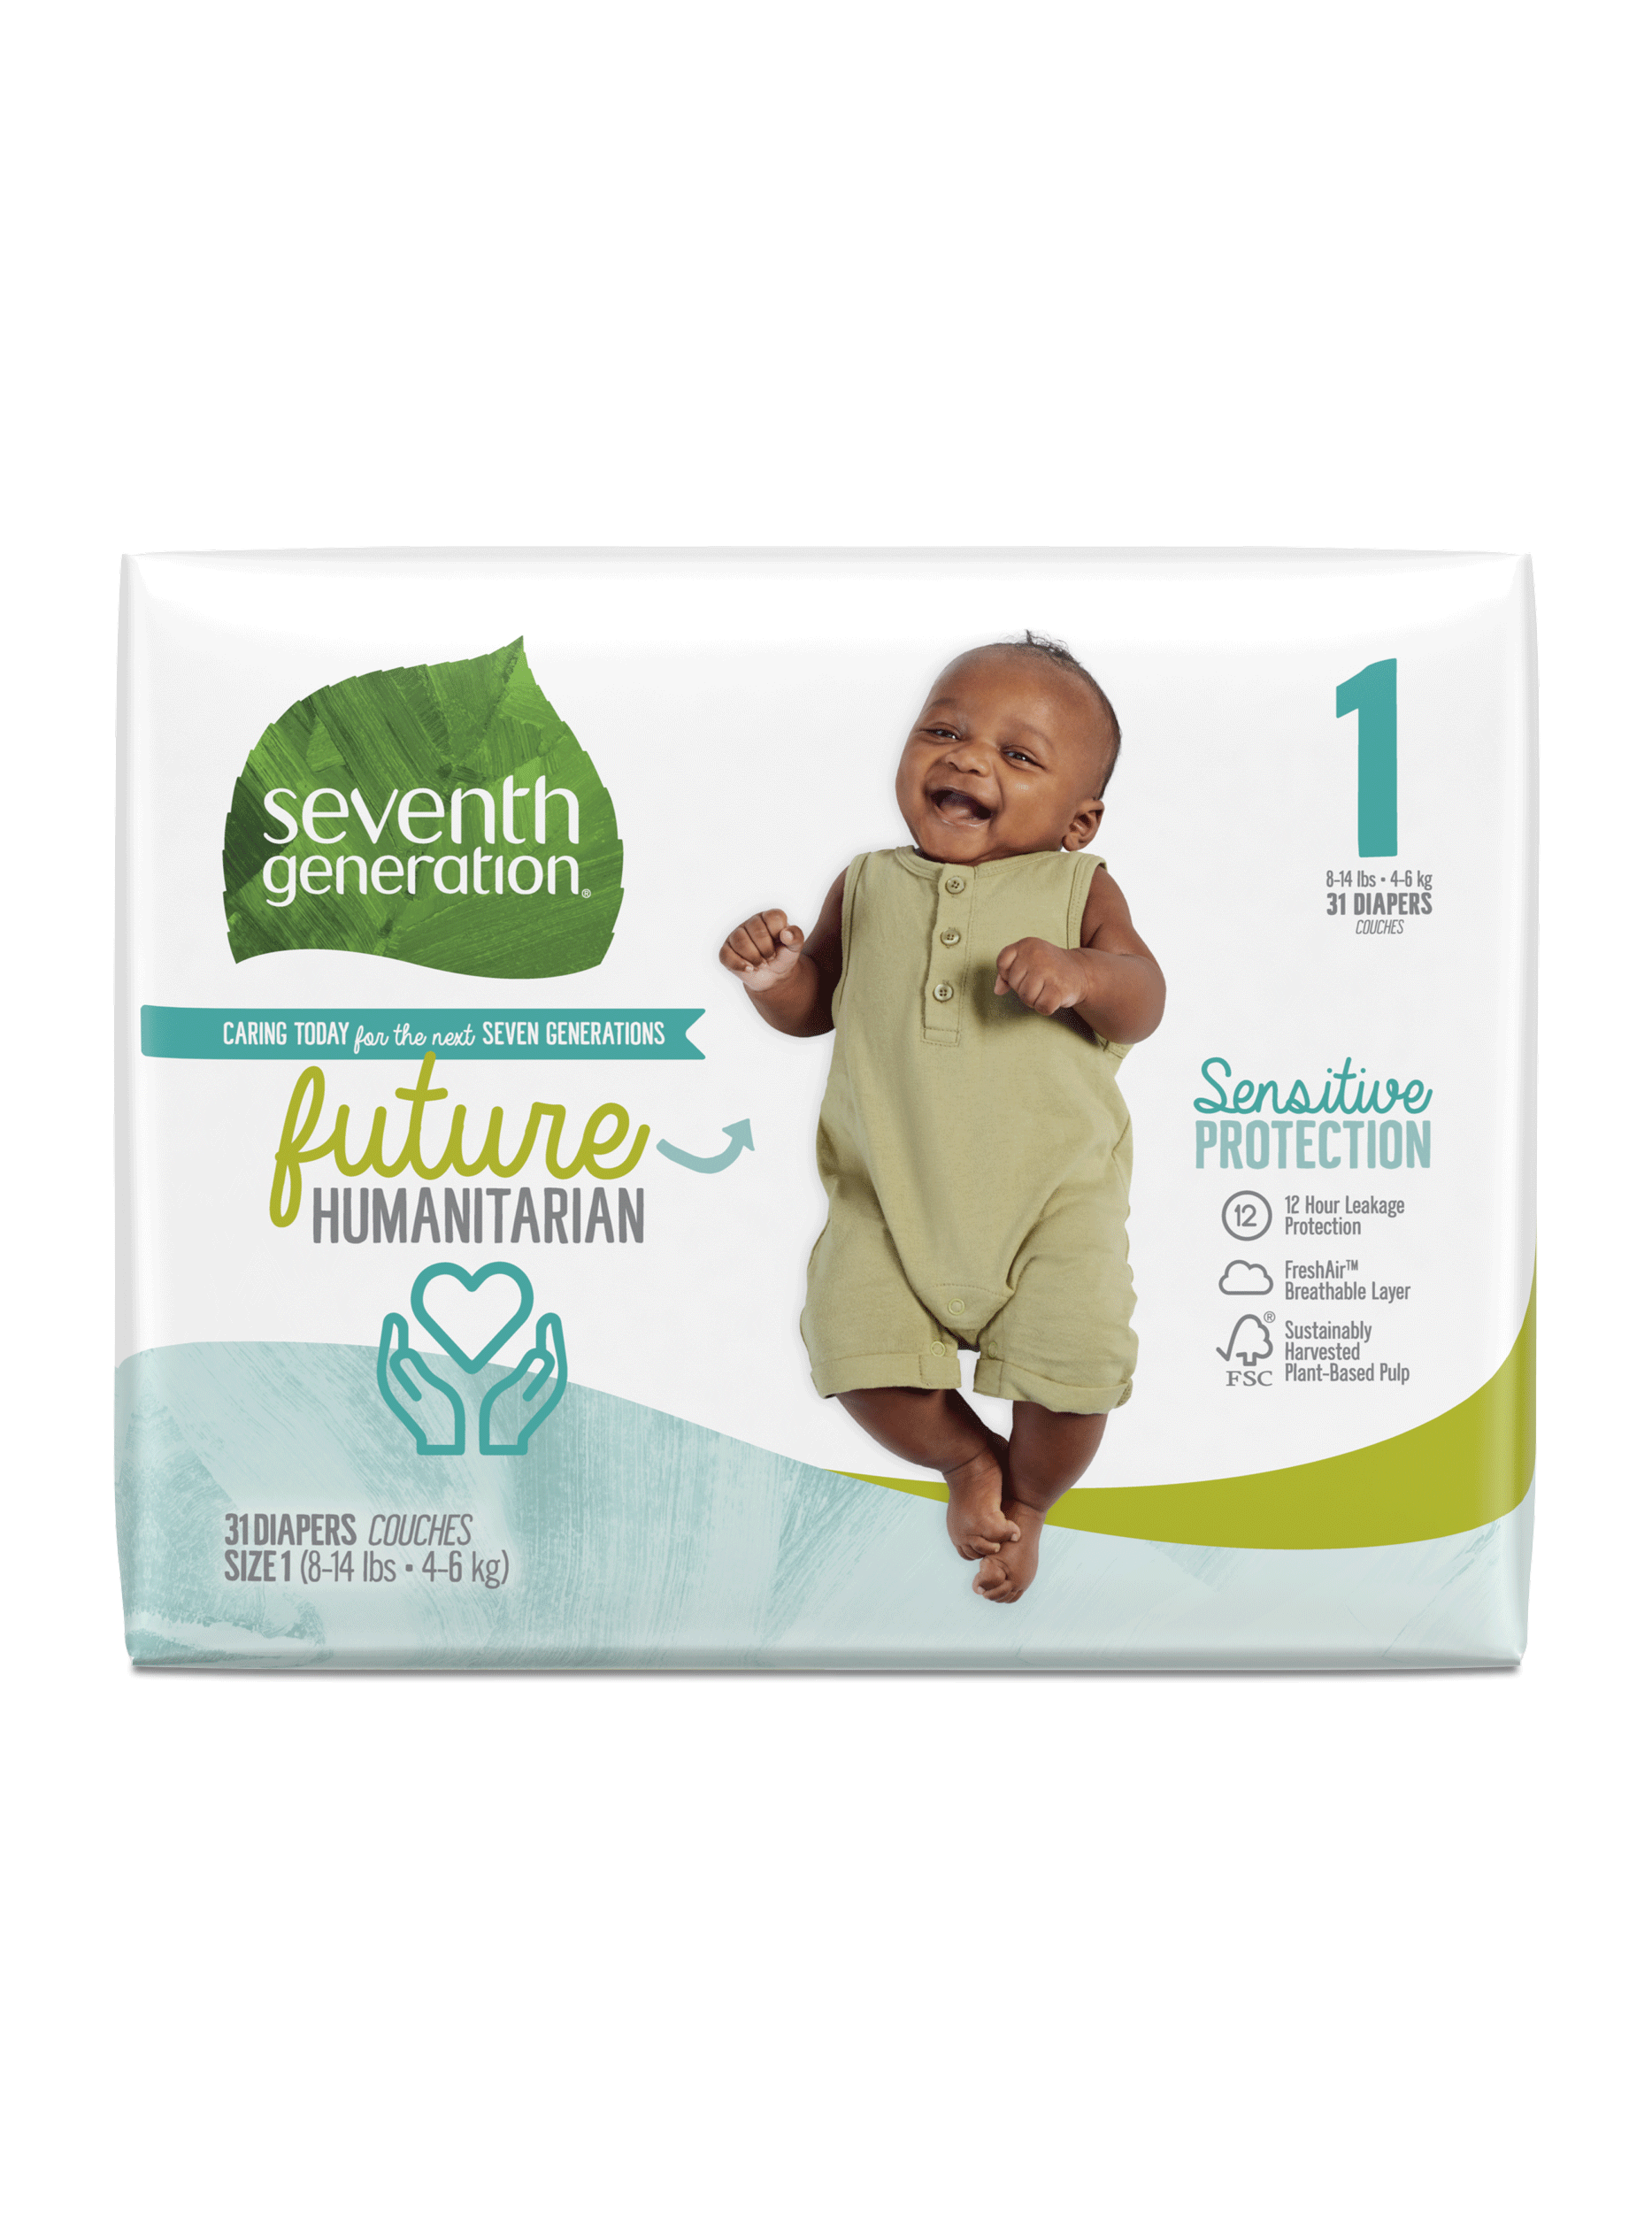 Pampers Pants Value Pack Size 6 35's - Clicks